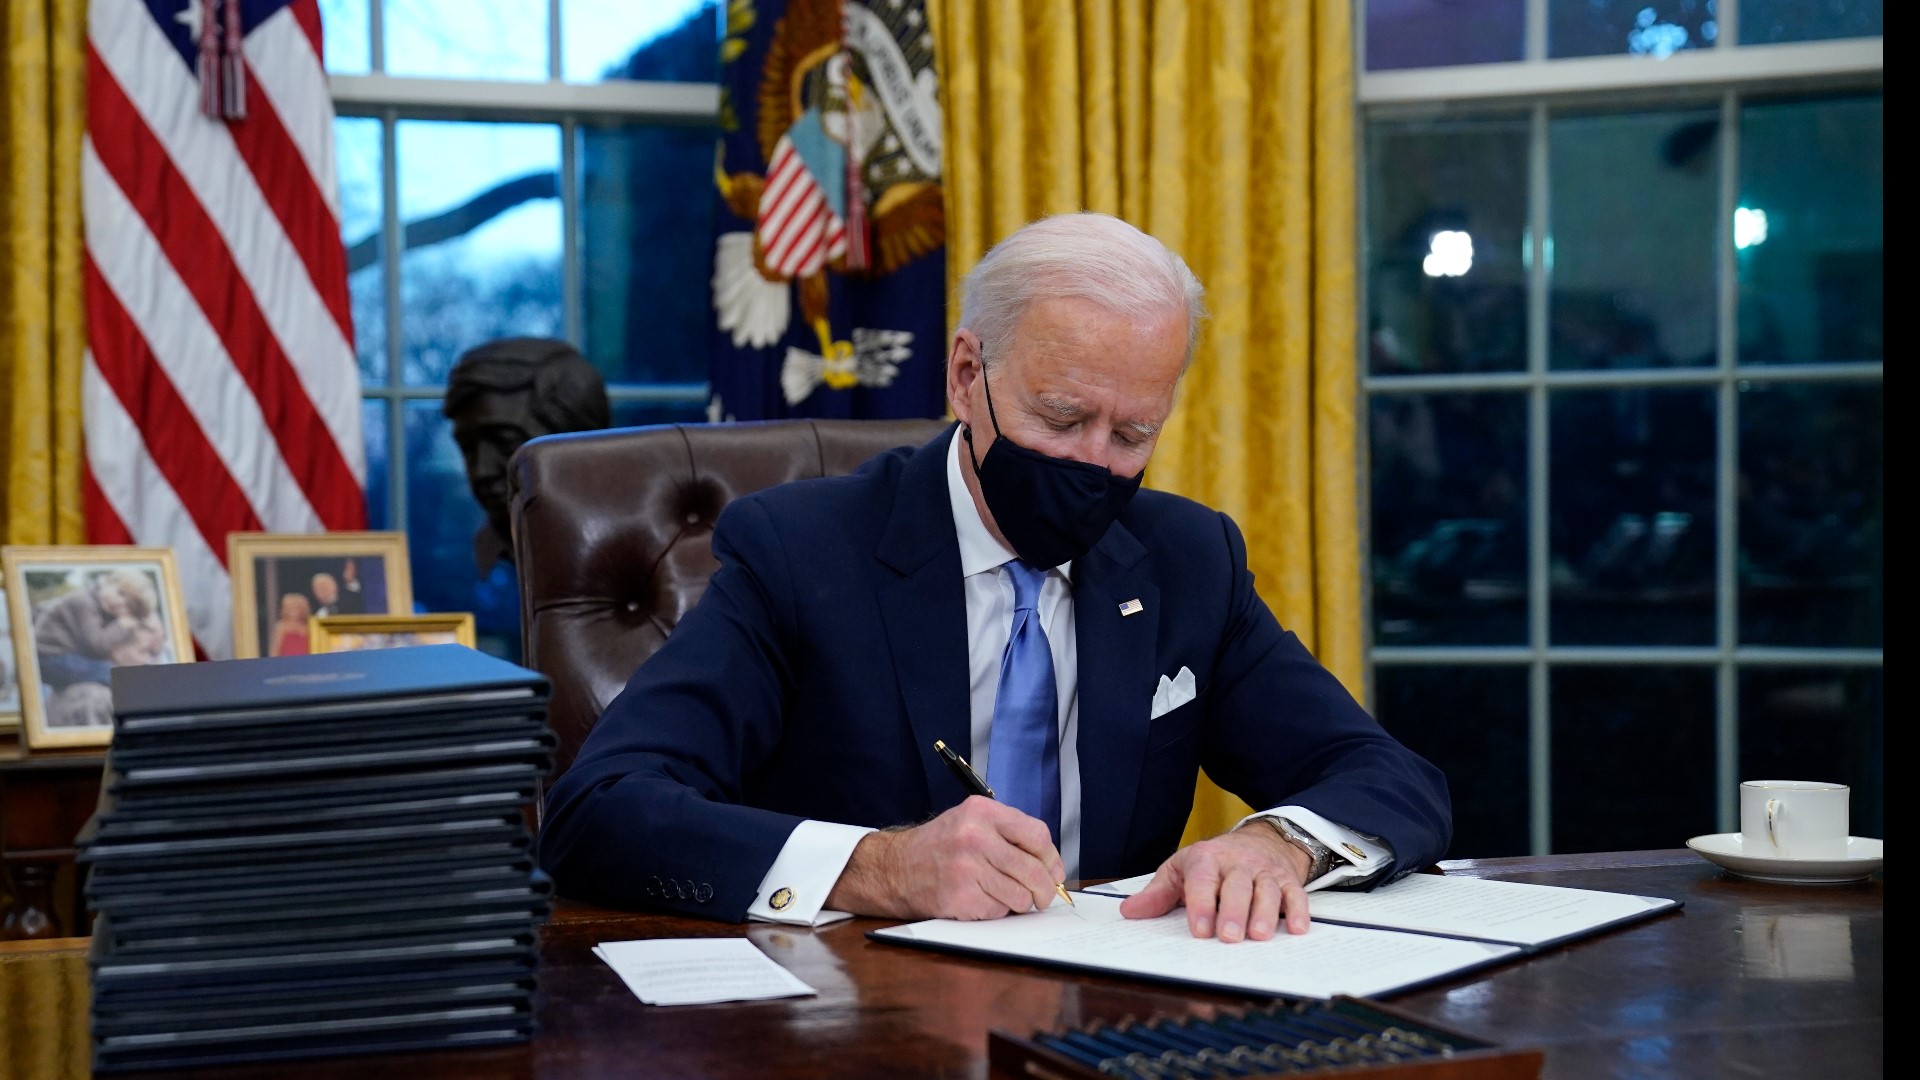 President Biden's vaccine mandate for federal employees comes by way of Executive Order